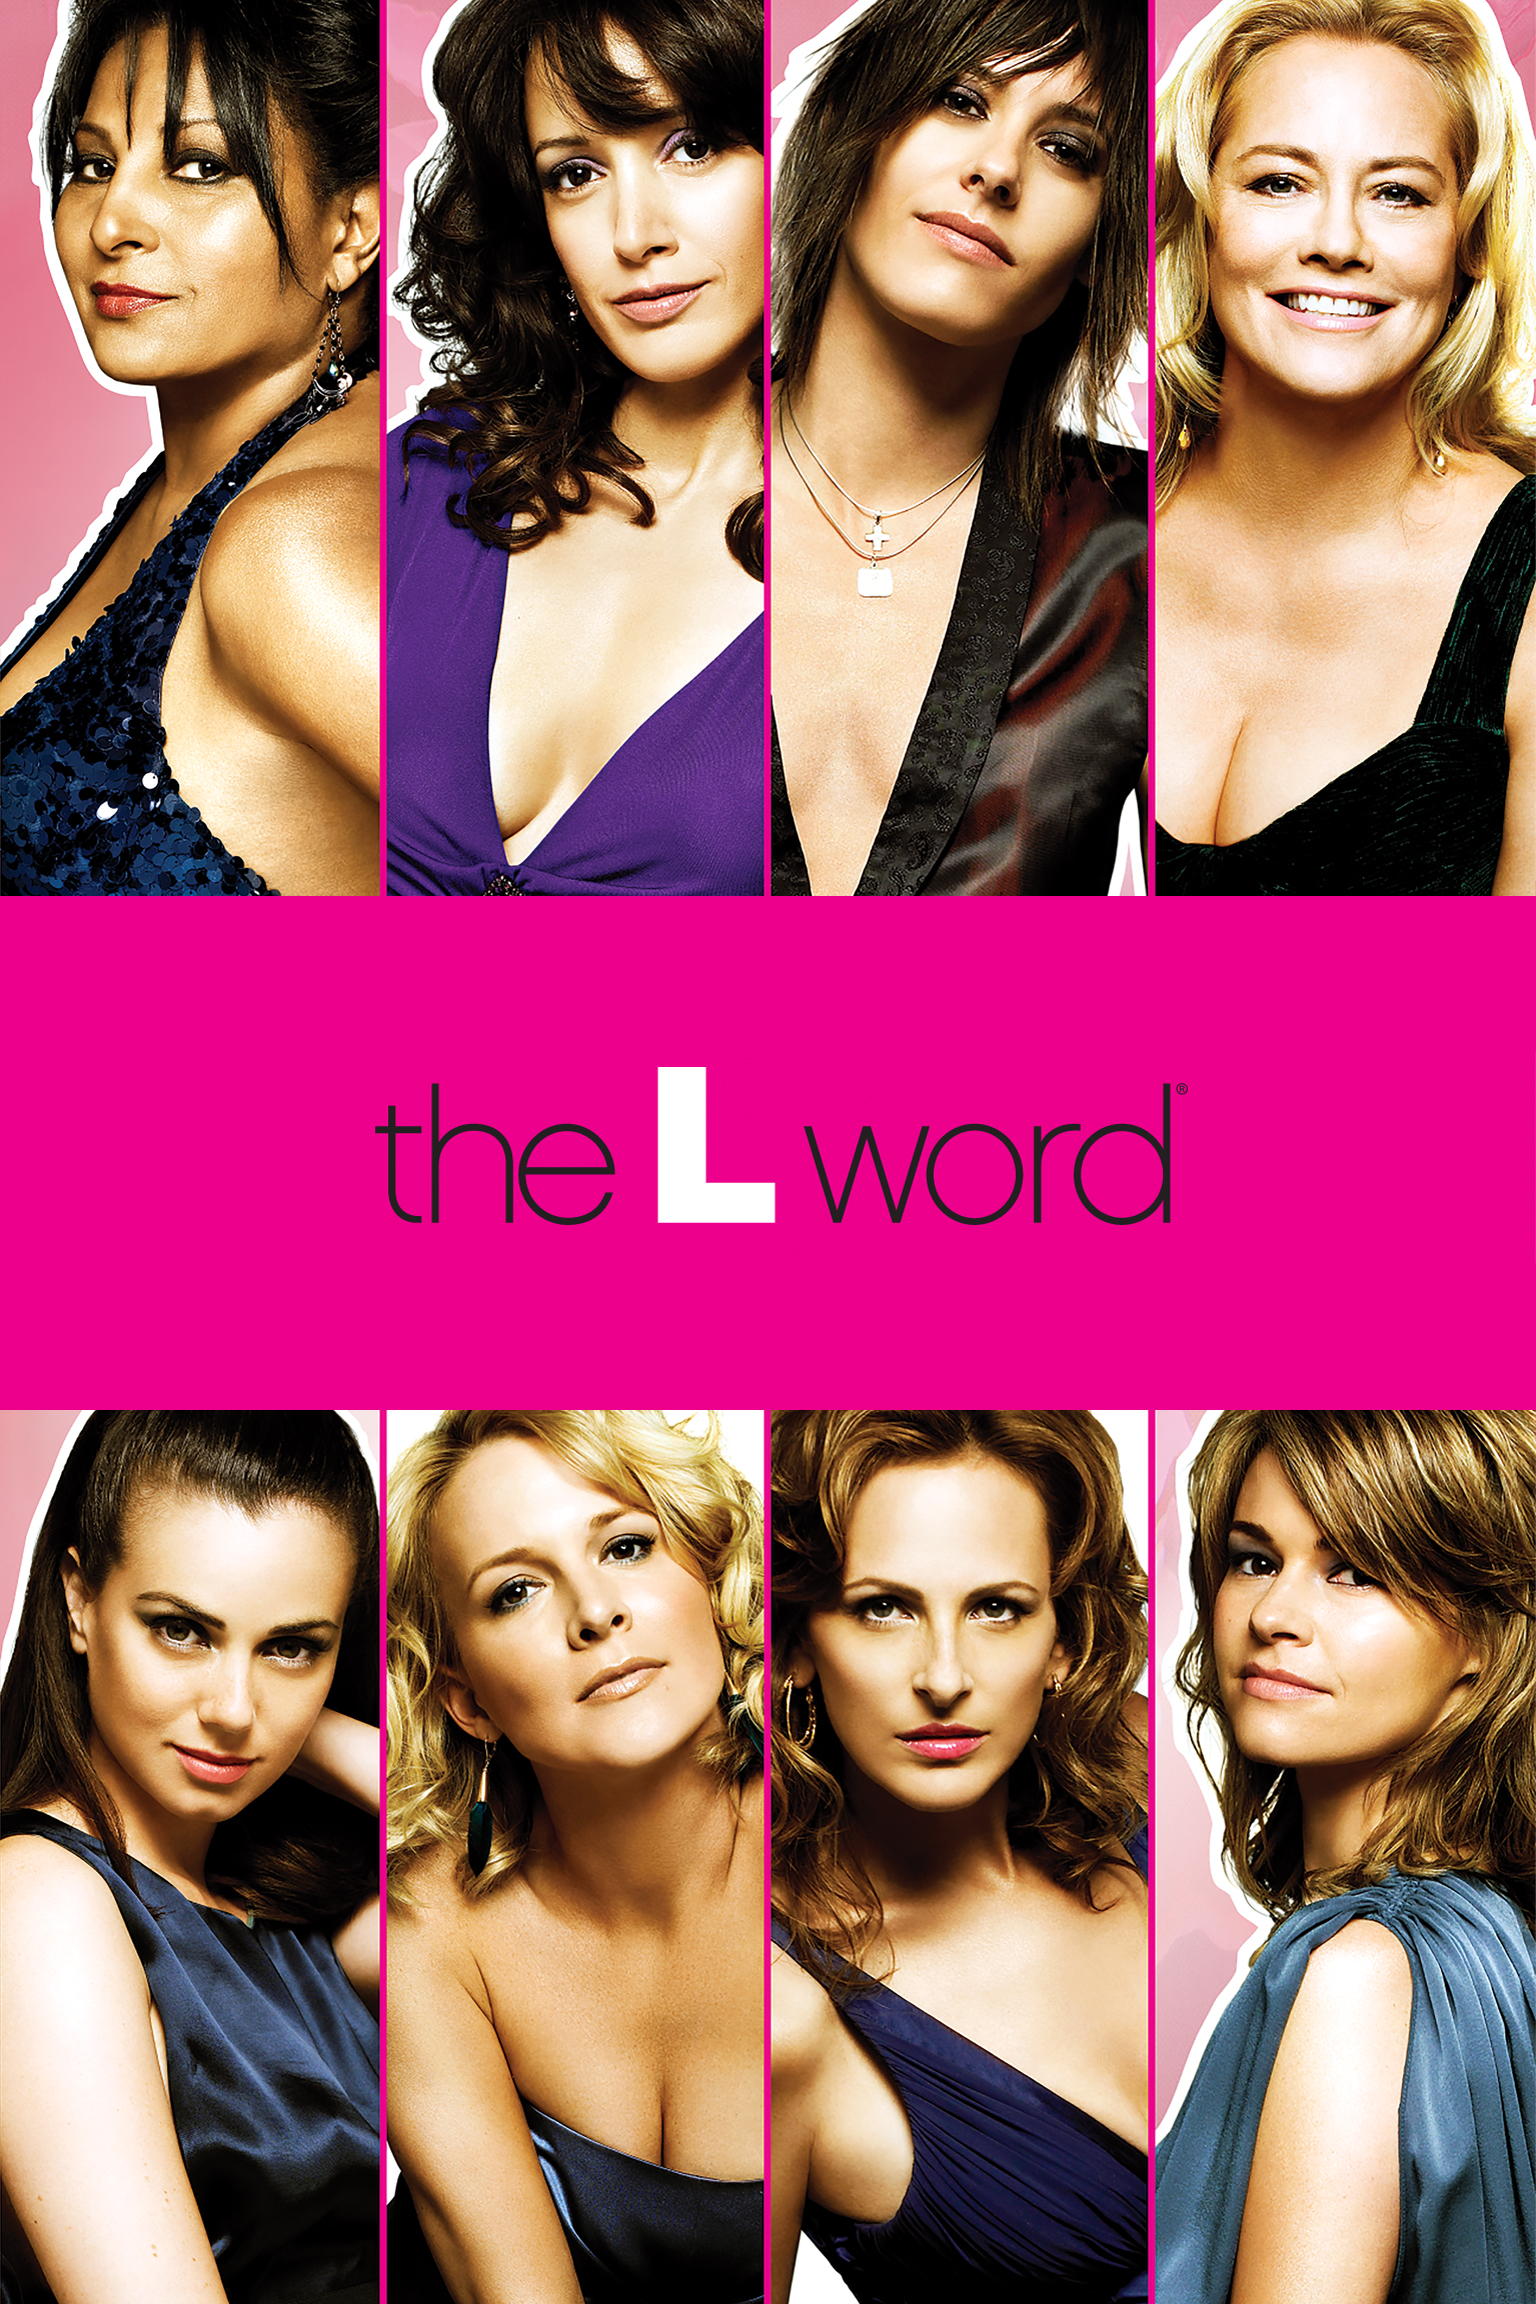 andy schneske recommends L Word Episode 1